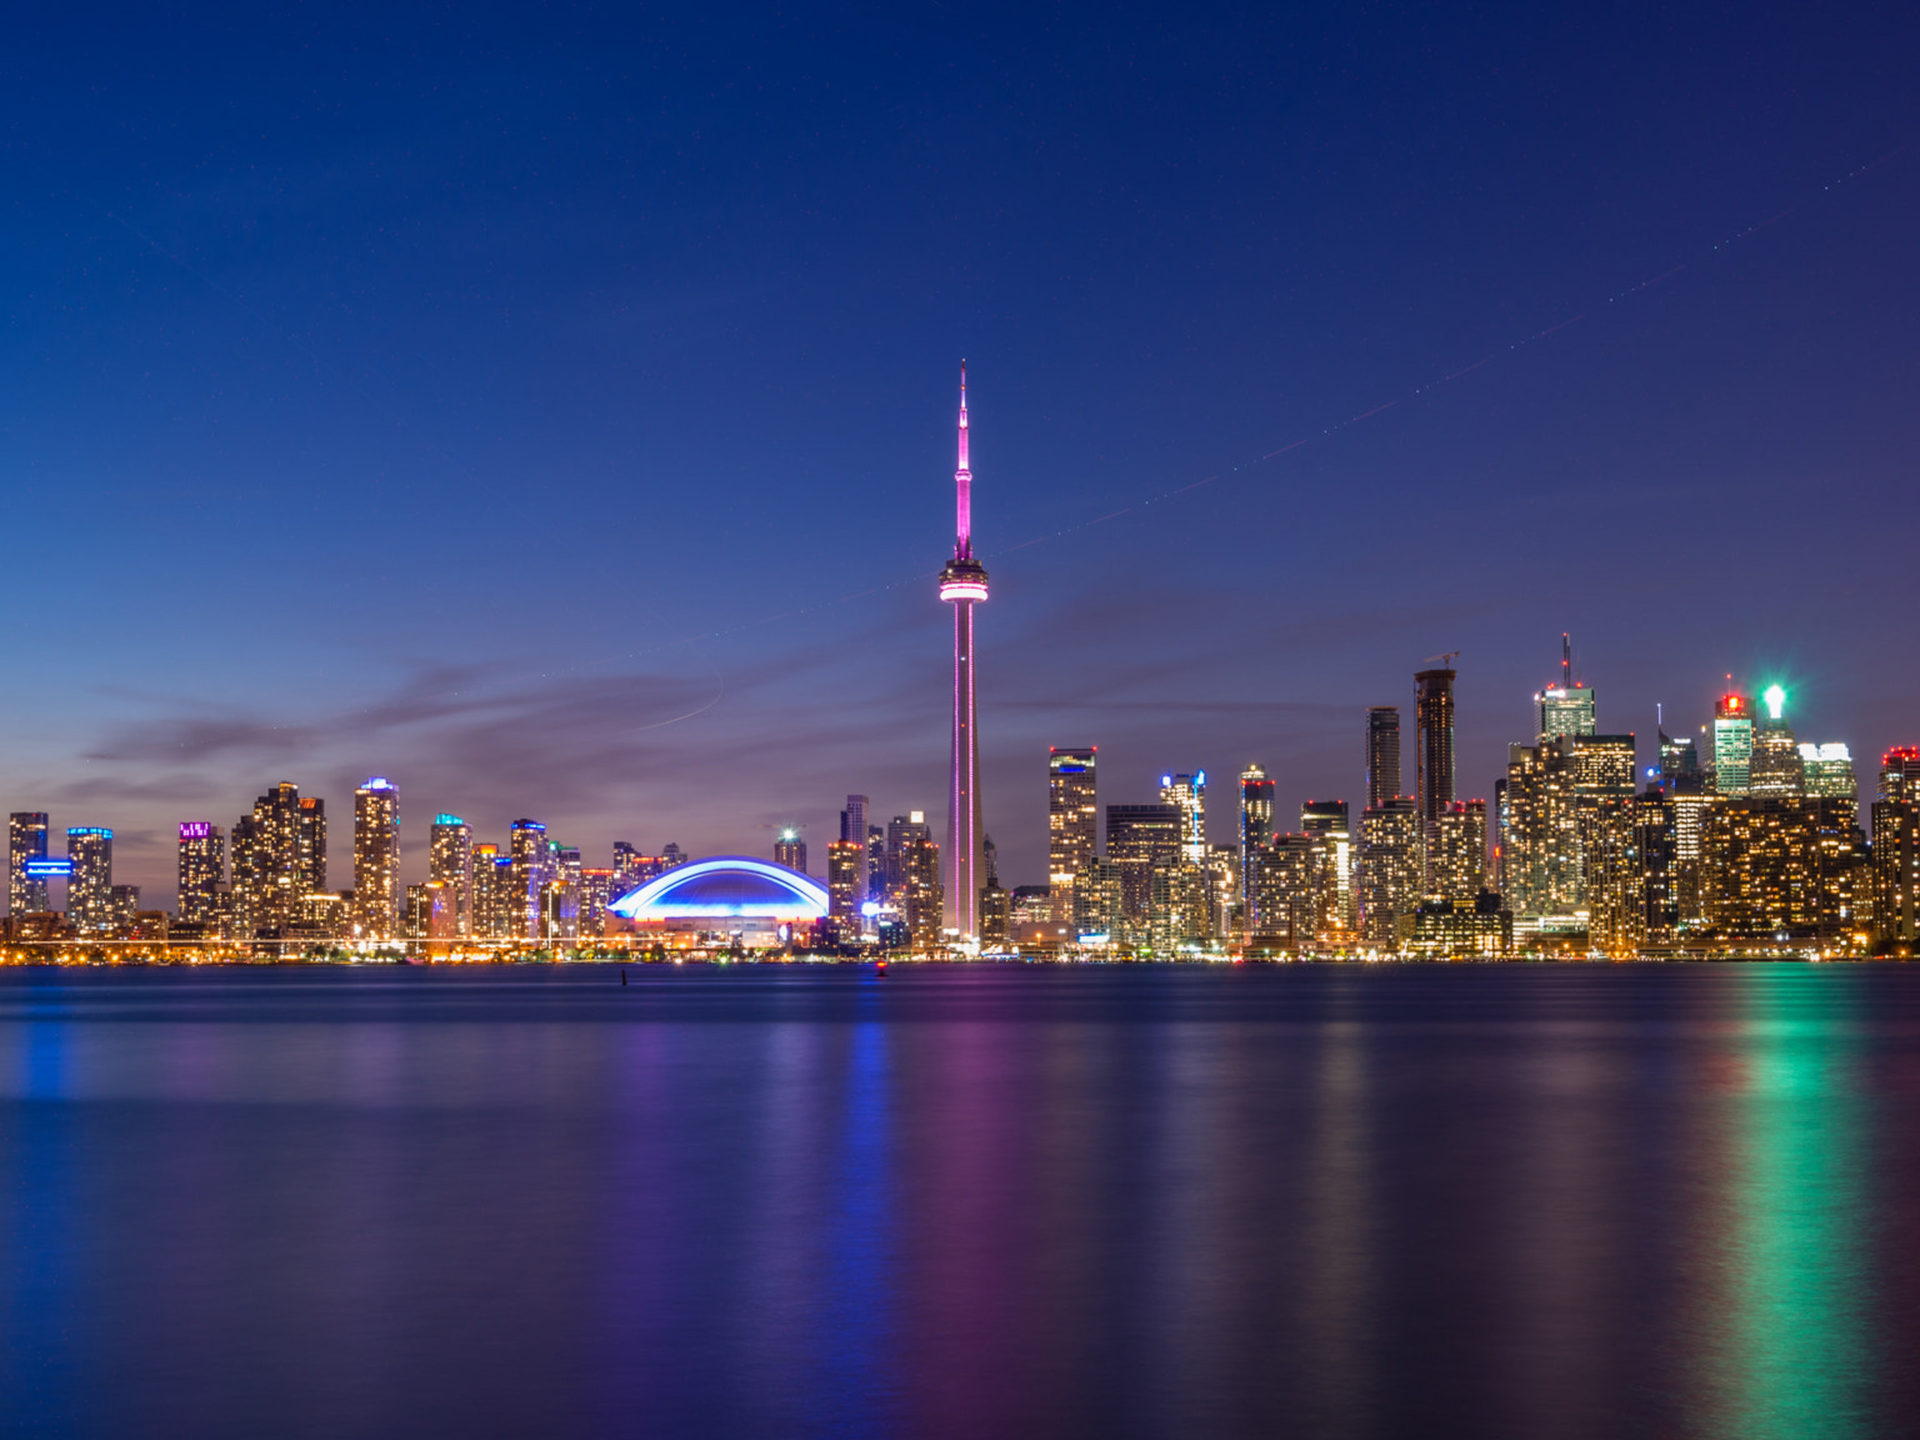 City and architecture center on toronto at night canada summer hd wallpapers for desktop mobile phones and laptop x